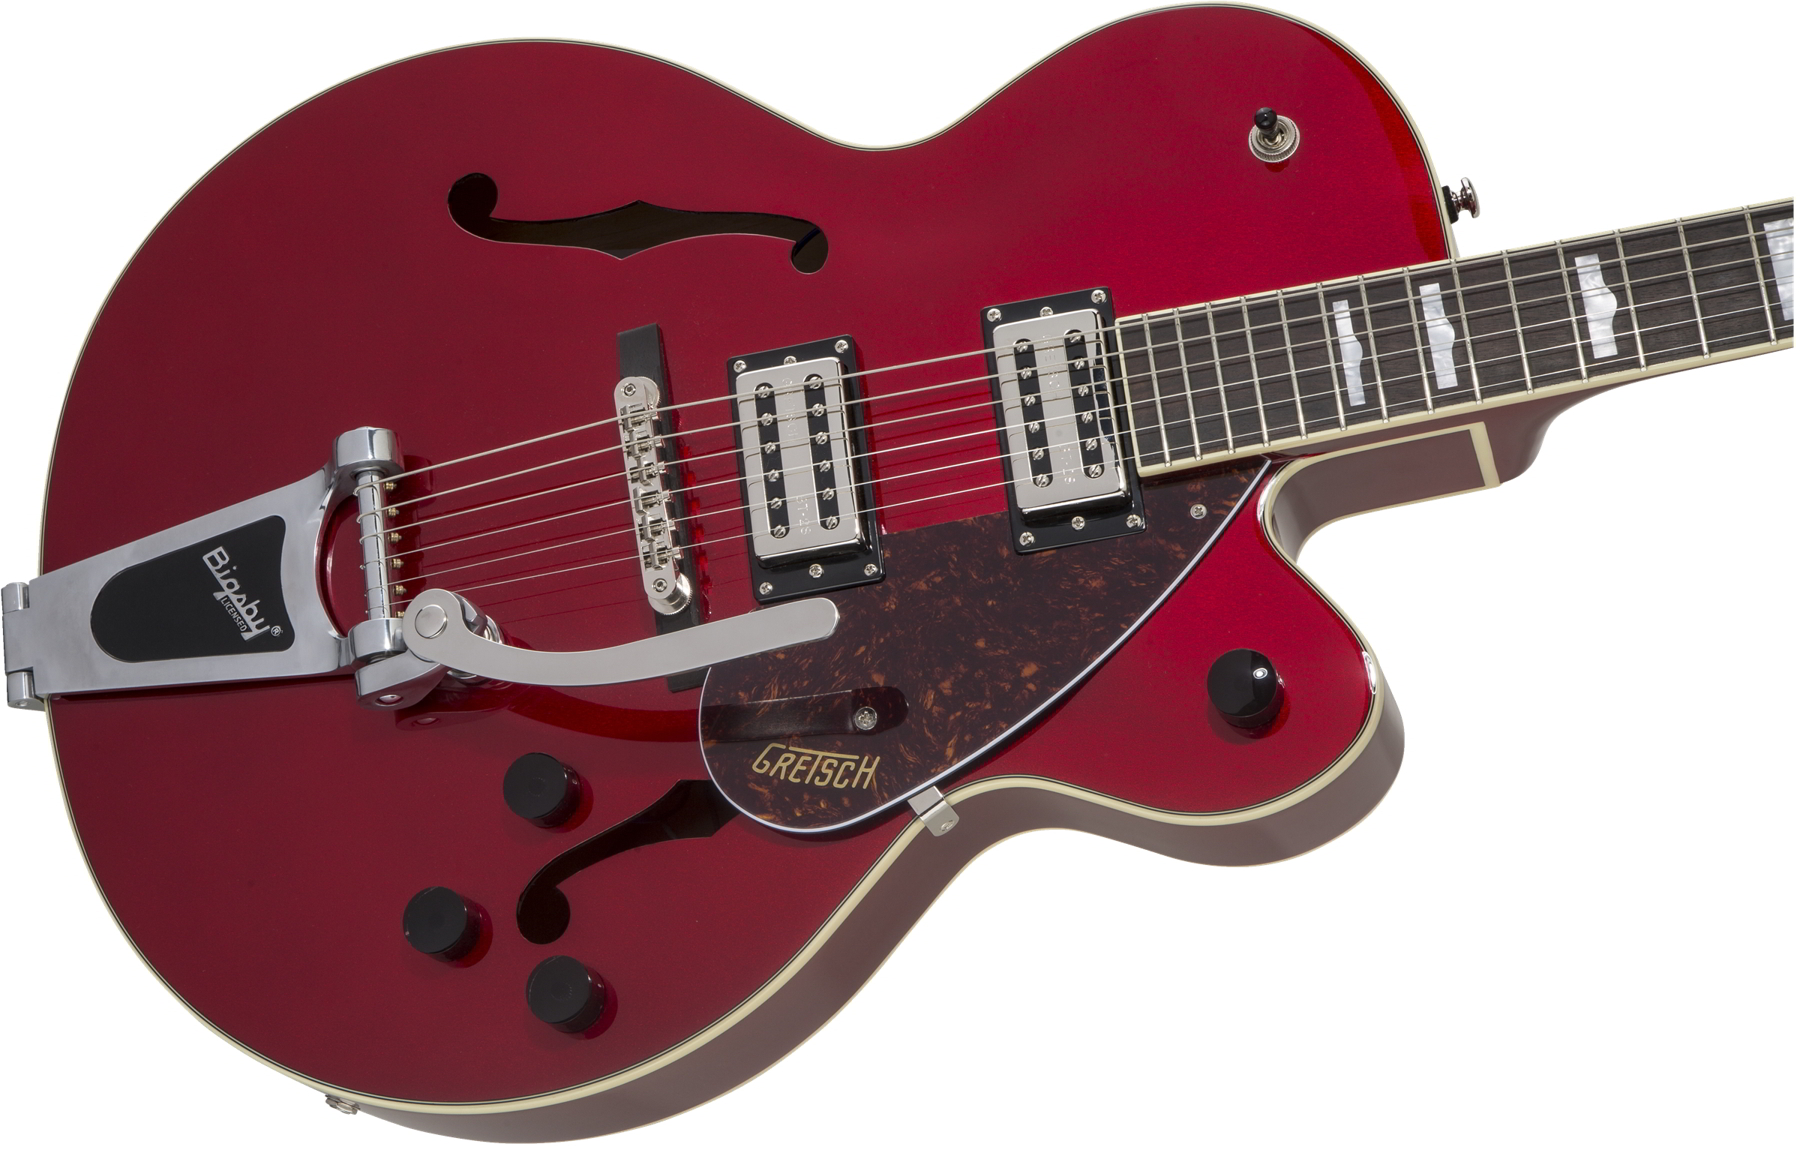 G2420T Streamliner Hollow Body with Bigsby, Laurel Fingerboard, Broad'Tron BT-2S Pickups, Candy Apple Red追加画像